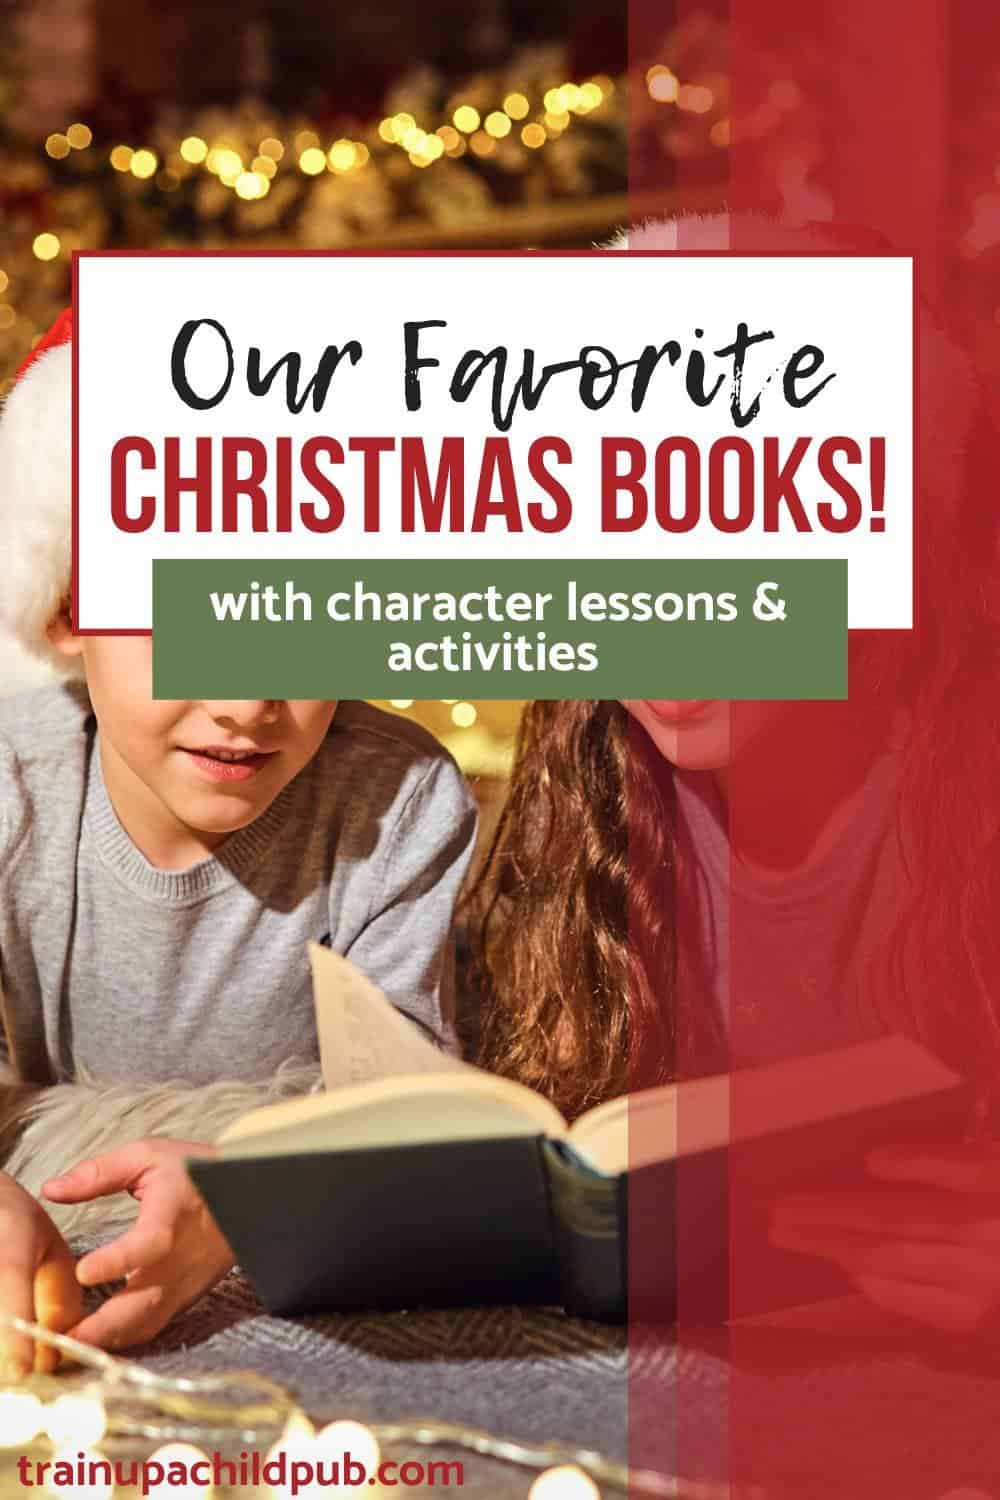 Mom and child reading favorite Christmas books together